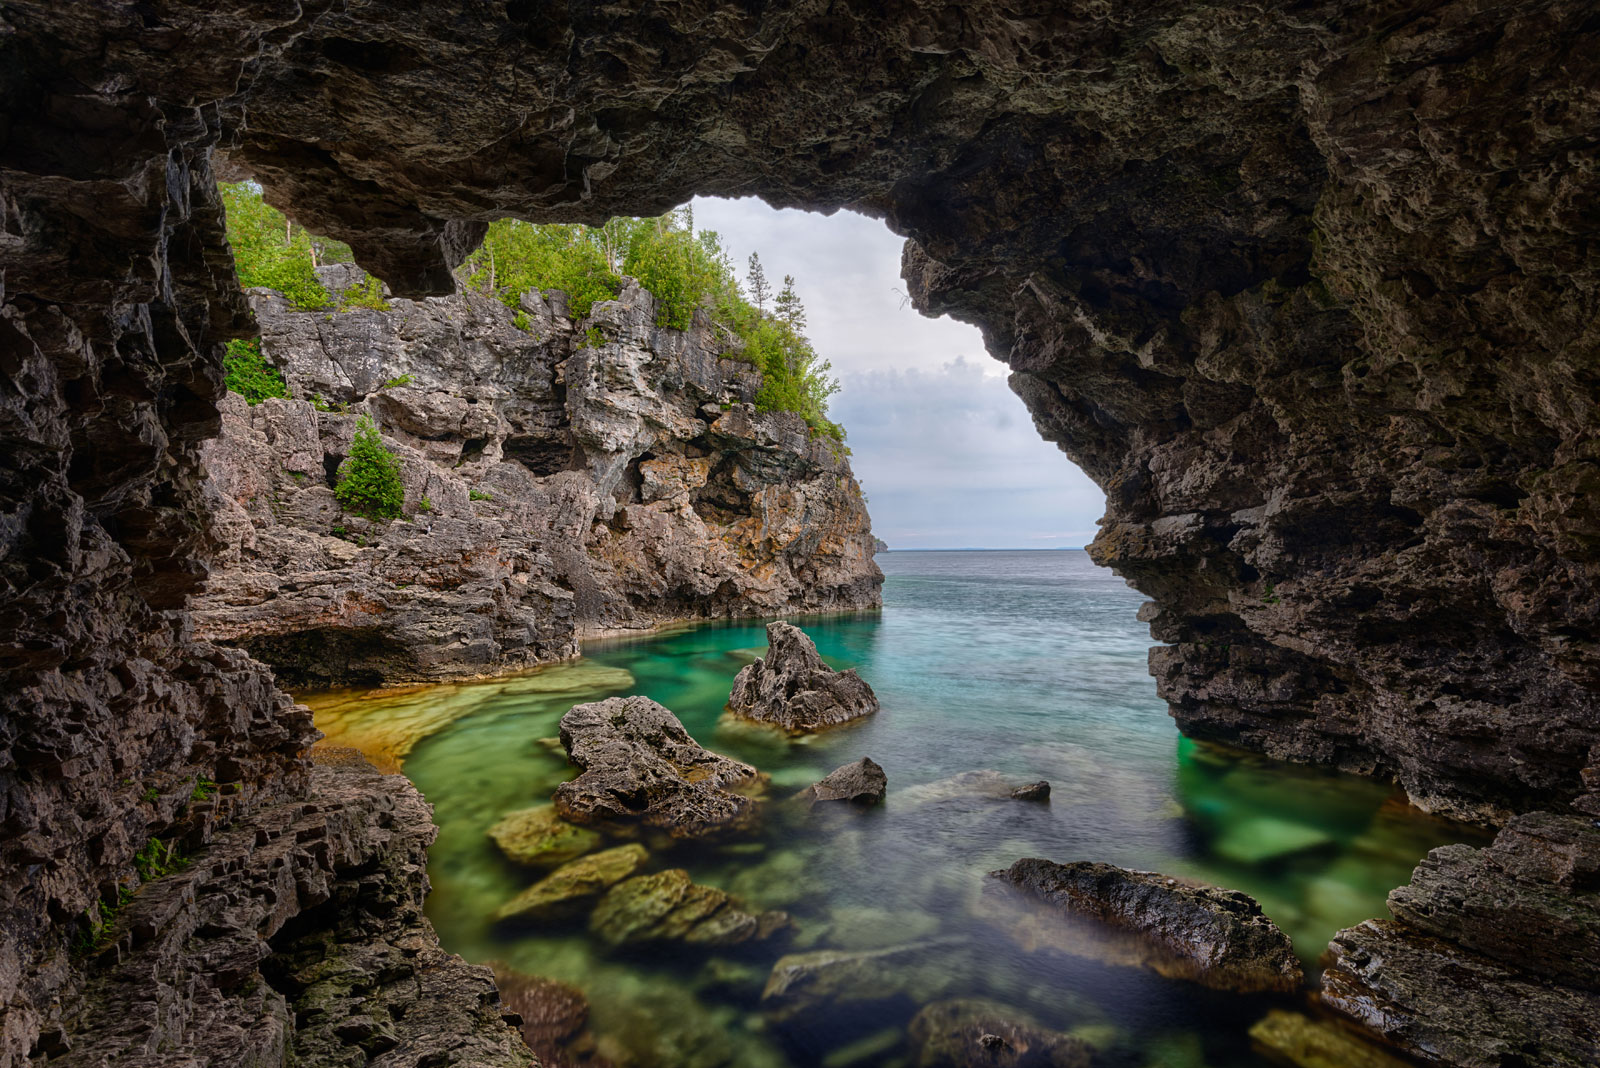 view from inside the grotto in bruce peninsula national park